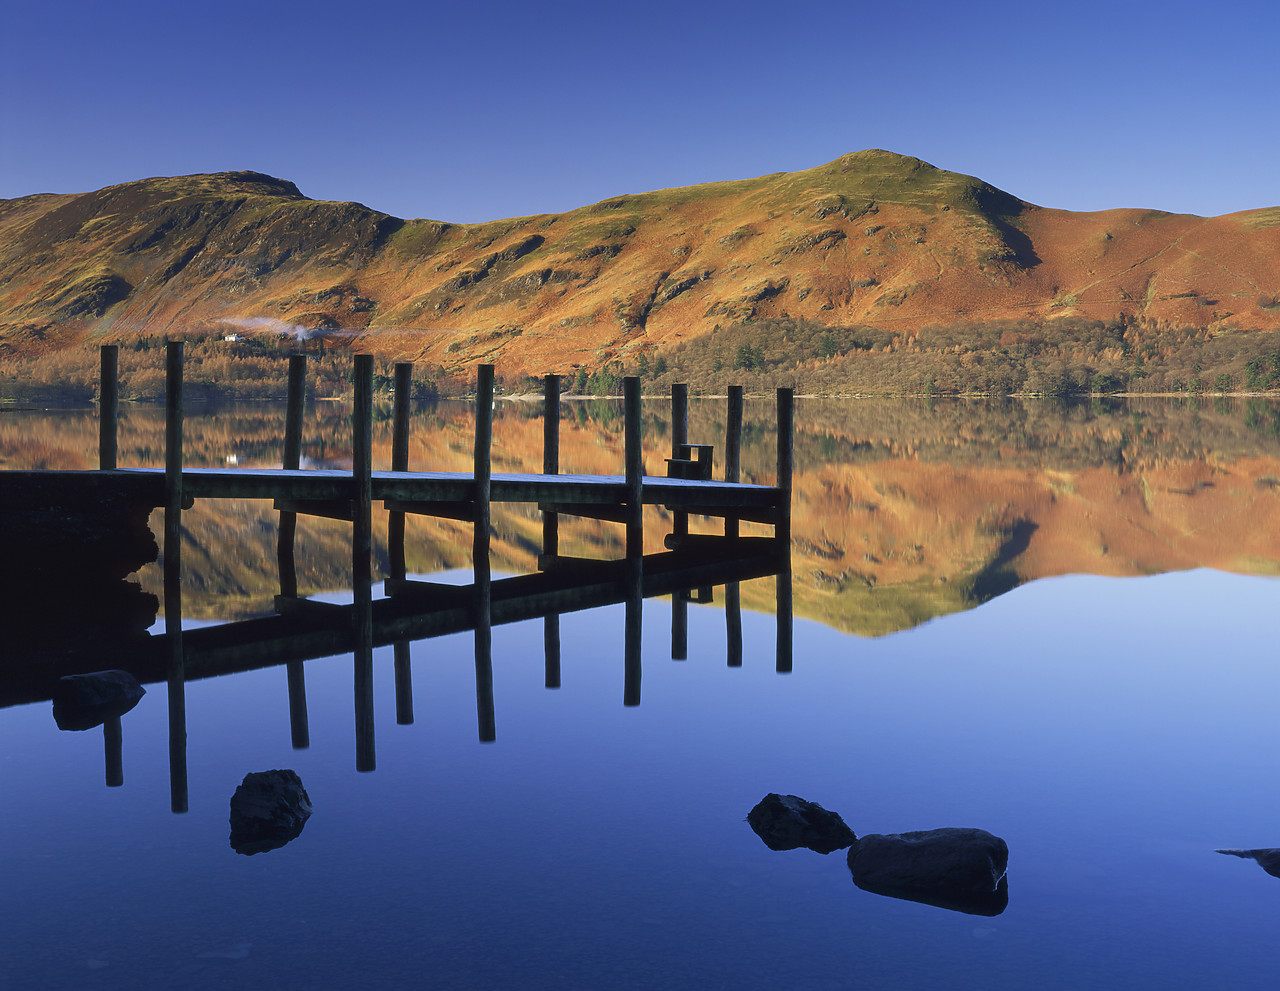 #080003-1 - Derwent Water Jetty Reflections, Lake District National Park, Cumbria, England